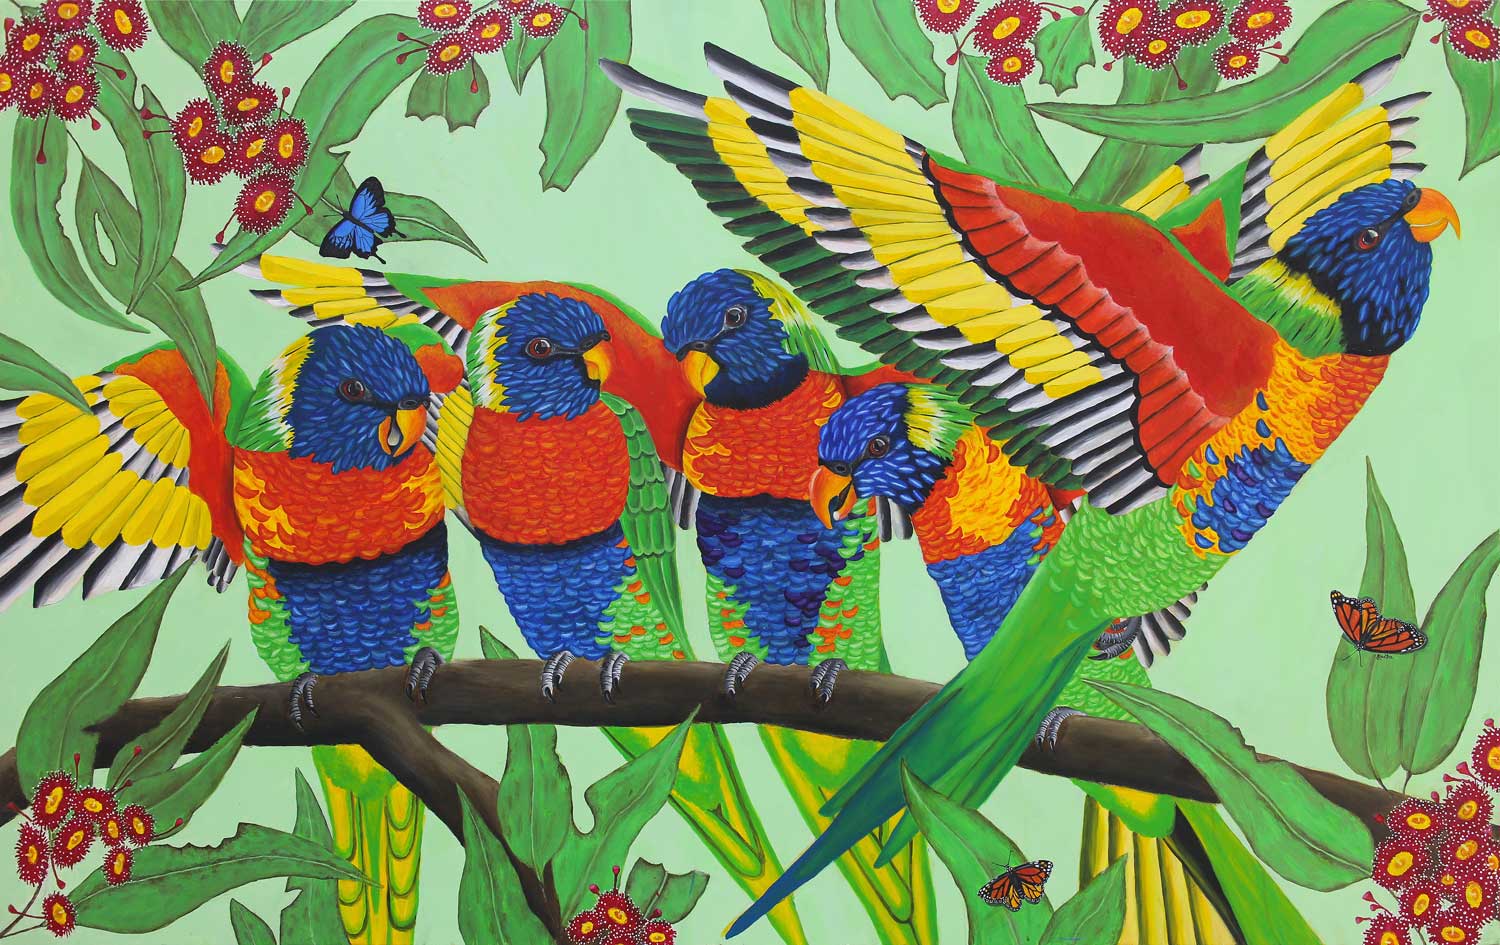 Student artwork of a flock of lorikeets on a branch